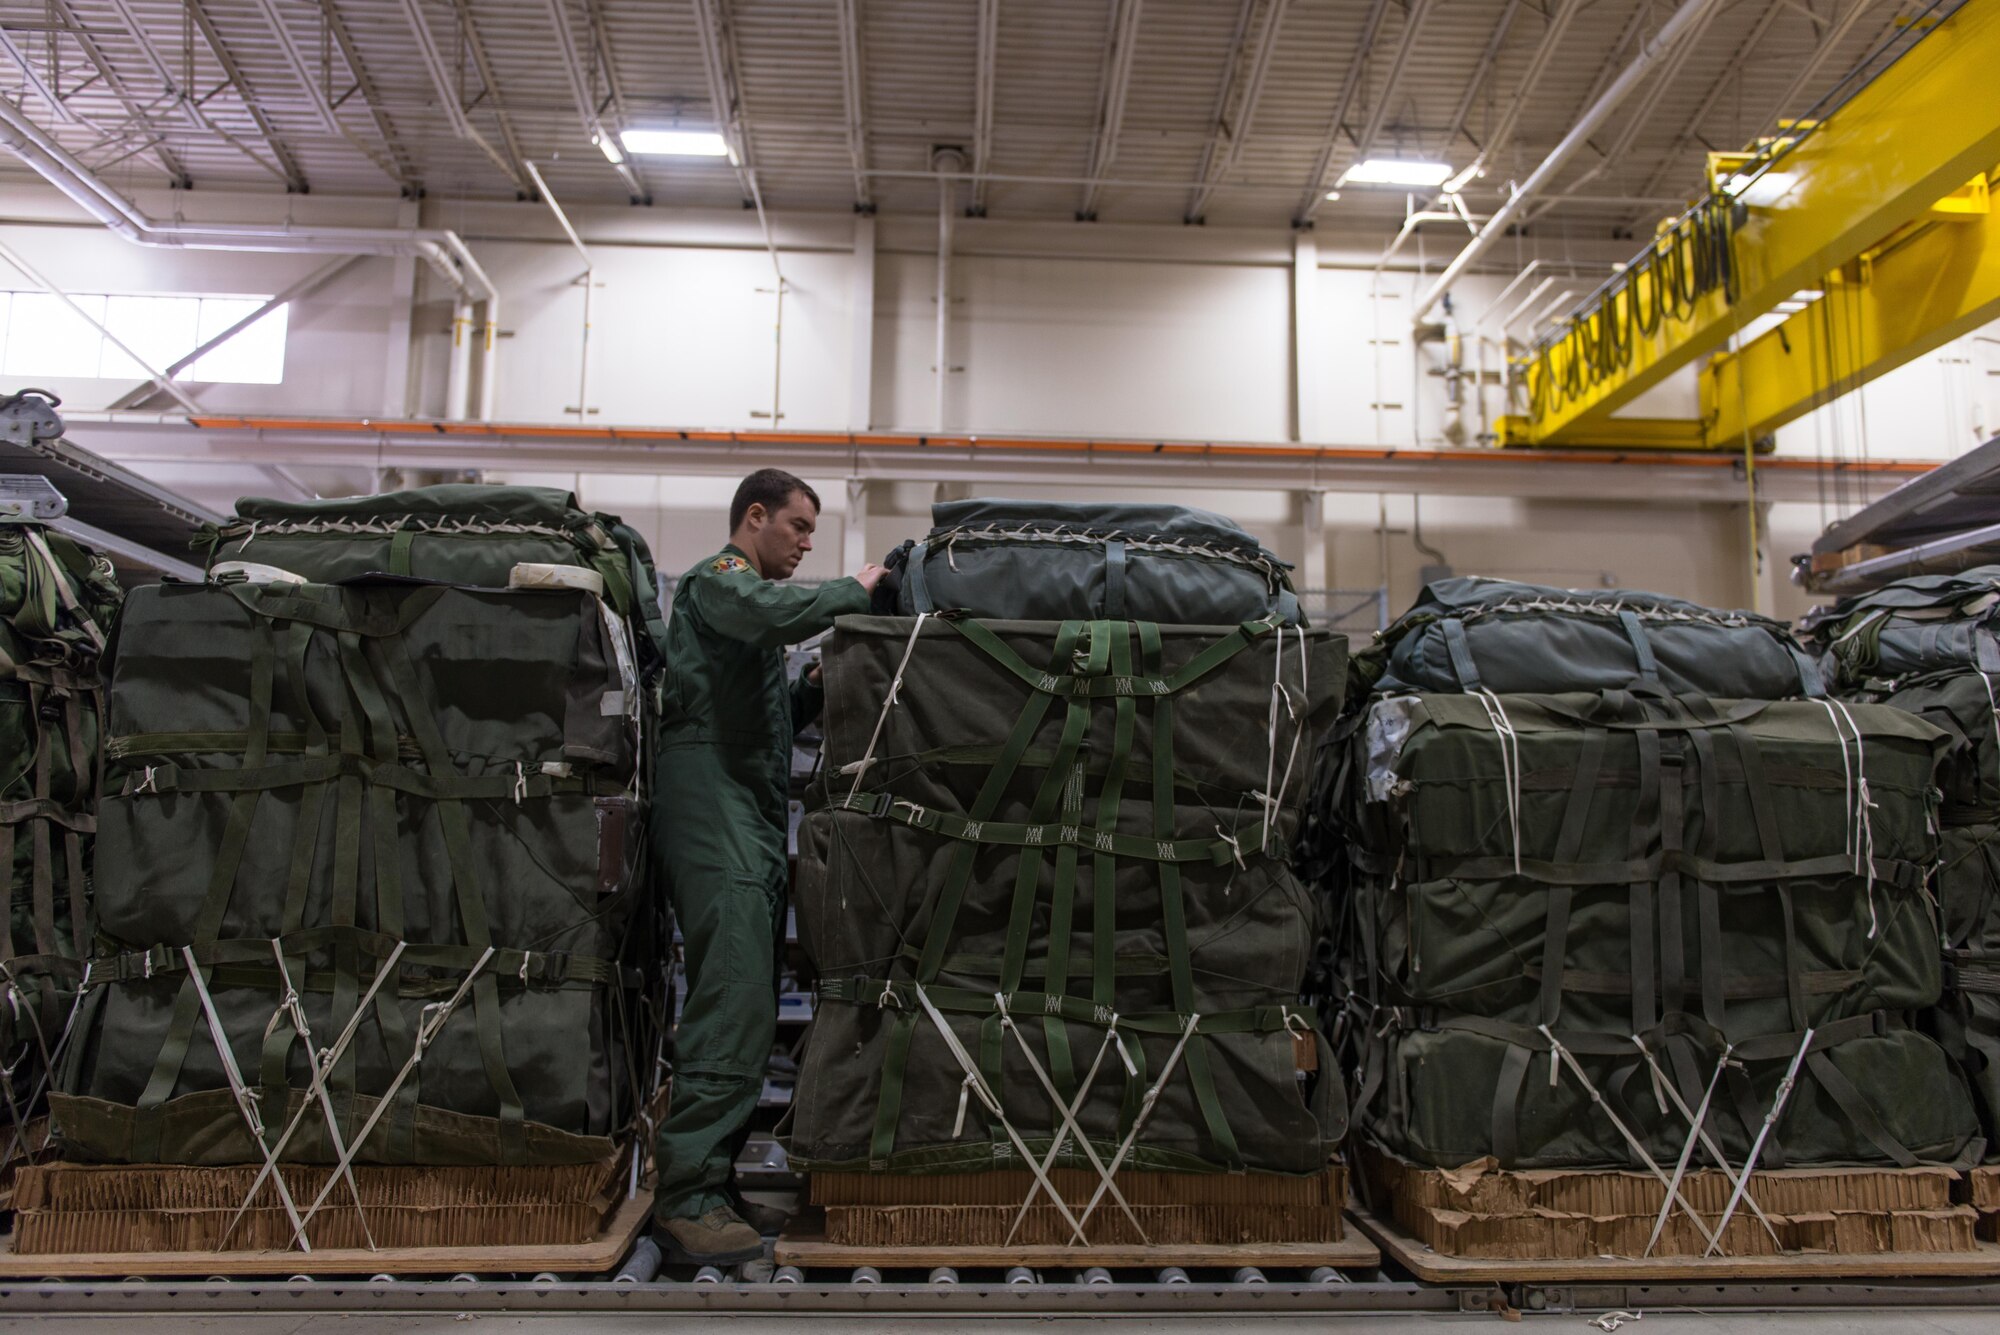 U.S. Air Force Senior Airman Andrew Fox, 36th Airlift Squadron joint airdrop inspector, inspects the parachute on a container delivery system bundle during Red Flag Alaska on Joint Base Elmendorf-Richardson, Alaska, Aug. 11, 2016. JAI's must perform two inspections; one before loading to ensure cargo is aircraft ready and rigged in accordance with proper rigging procedures and an after inspection of the cargo once it's been completely loaded on the aircraft. (U.S. Air Force photo by Staff Sgt. Michael Smith/Released)